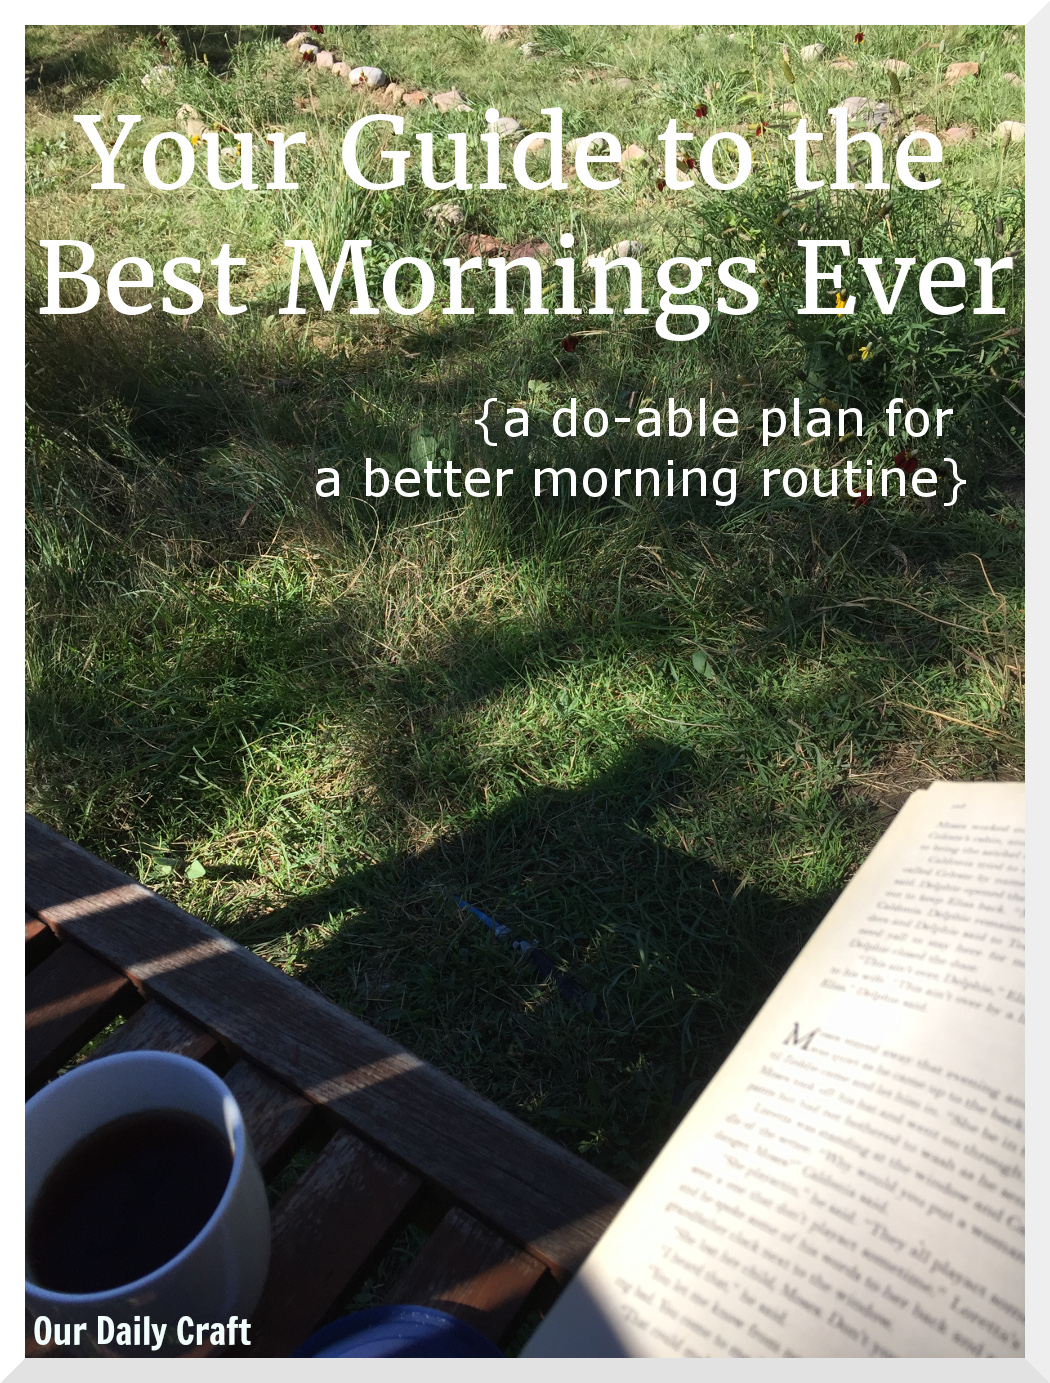 These 3 Easy Steps Will Get You to the Best Mornings Ever